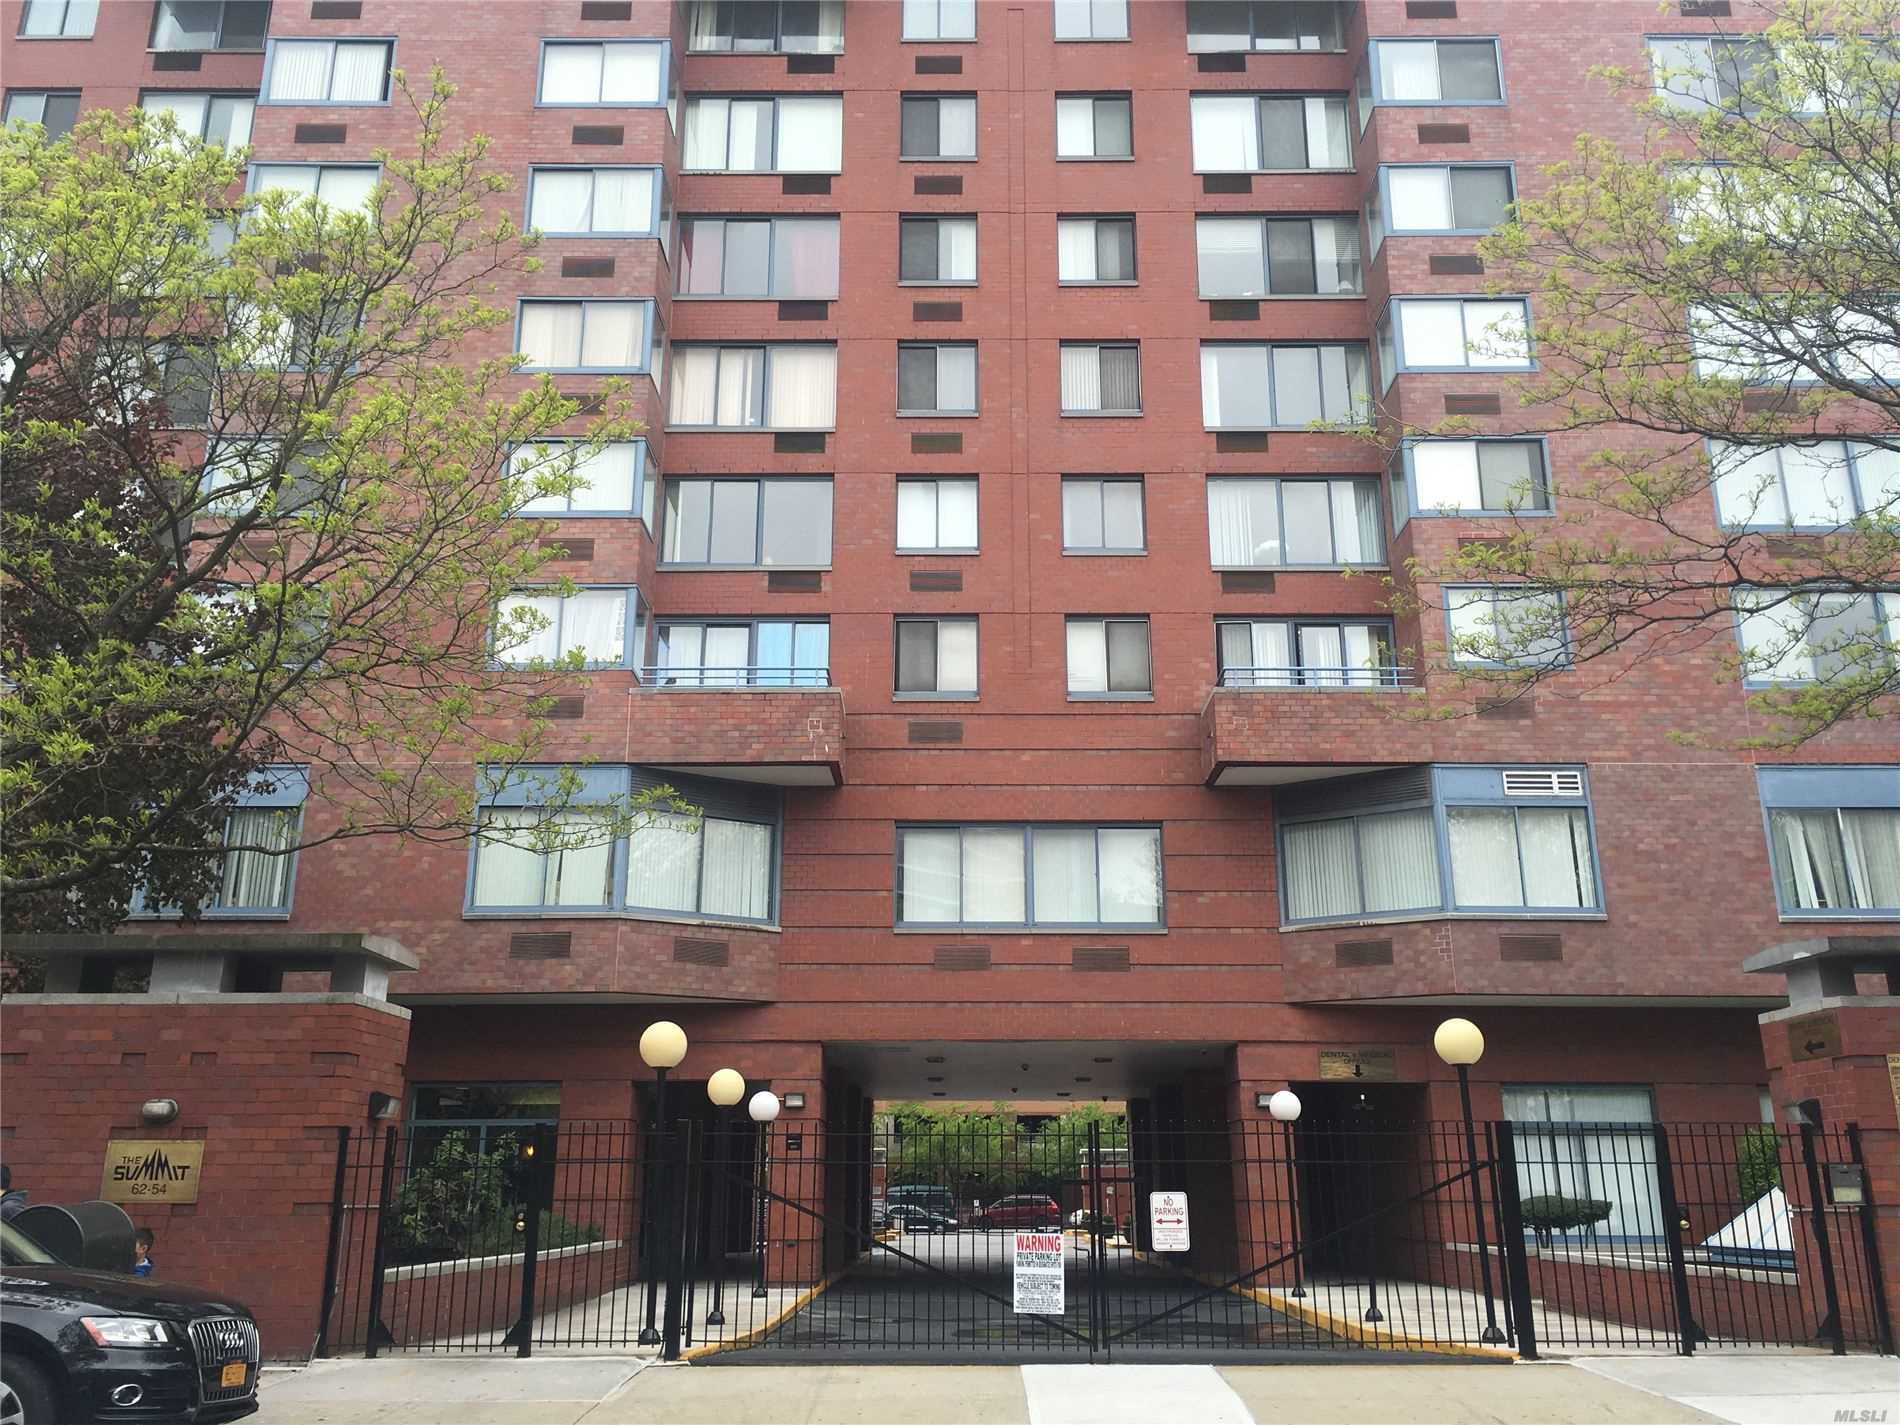 Listing in Rego Park, NY